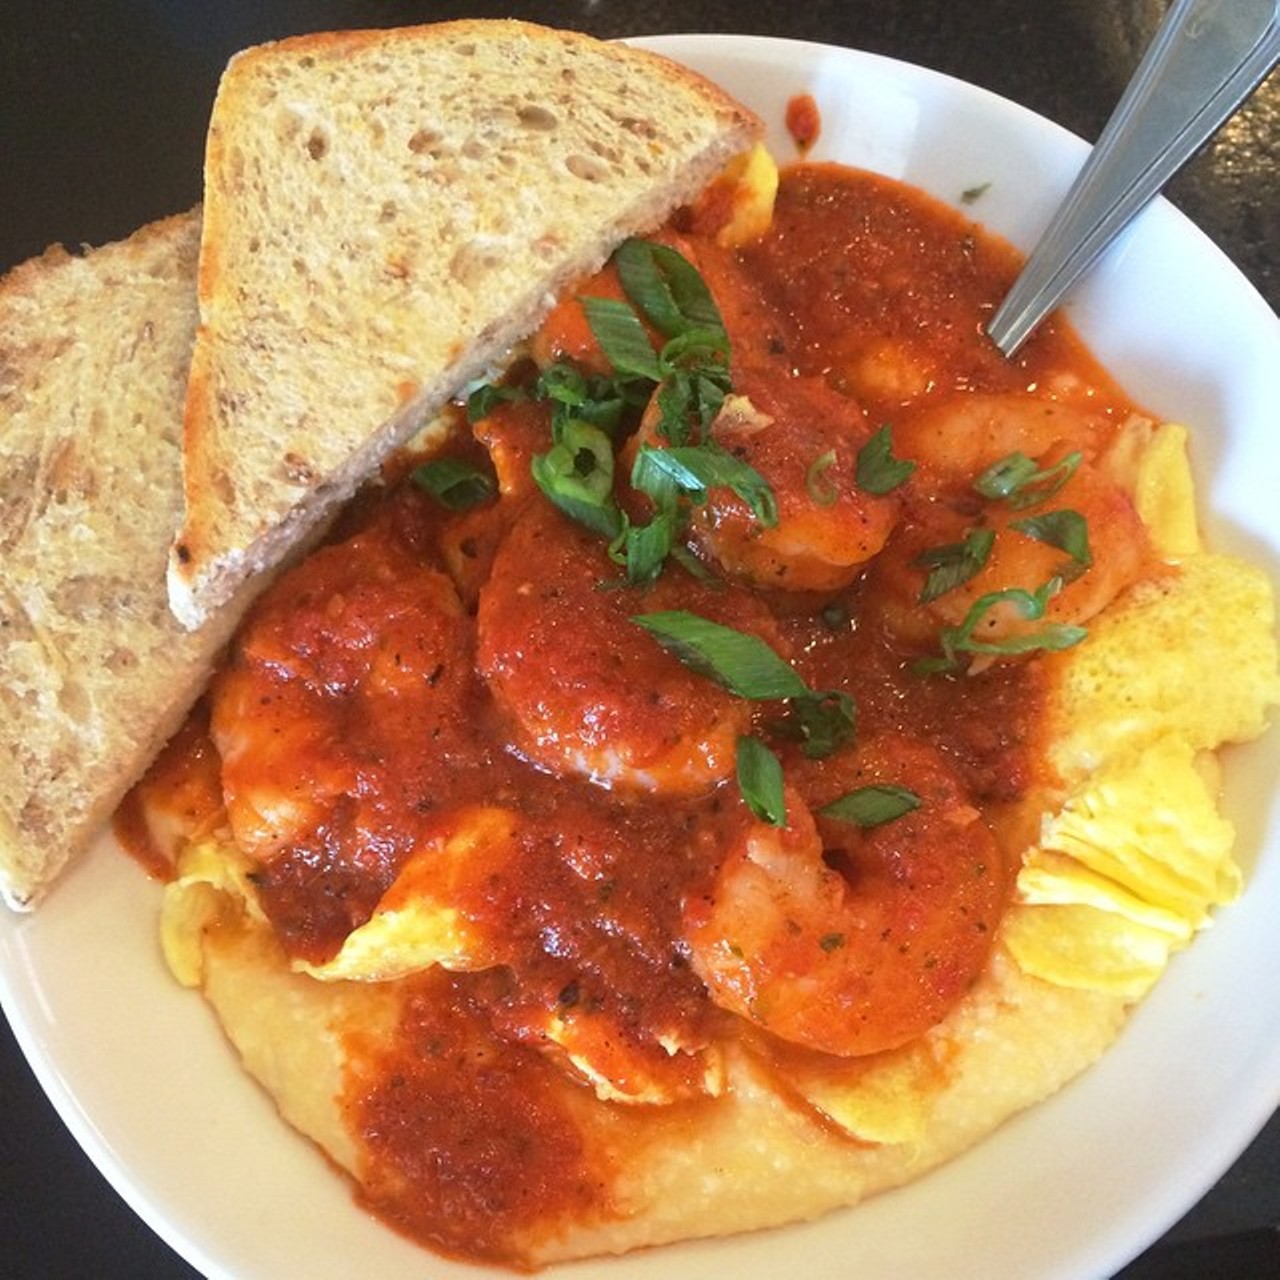 Shrimp and grits from Cafe Melissa, Avon.